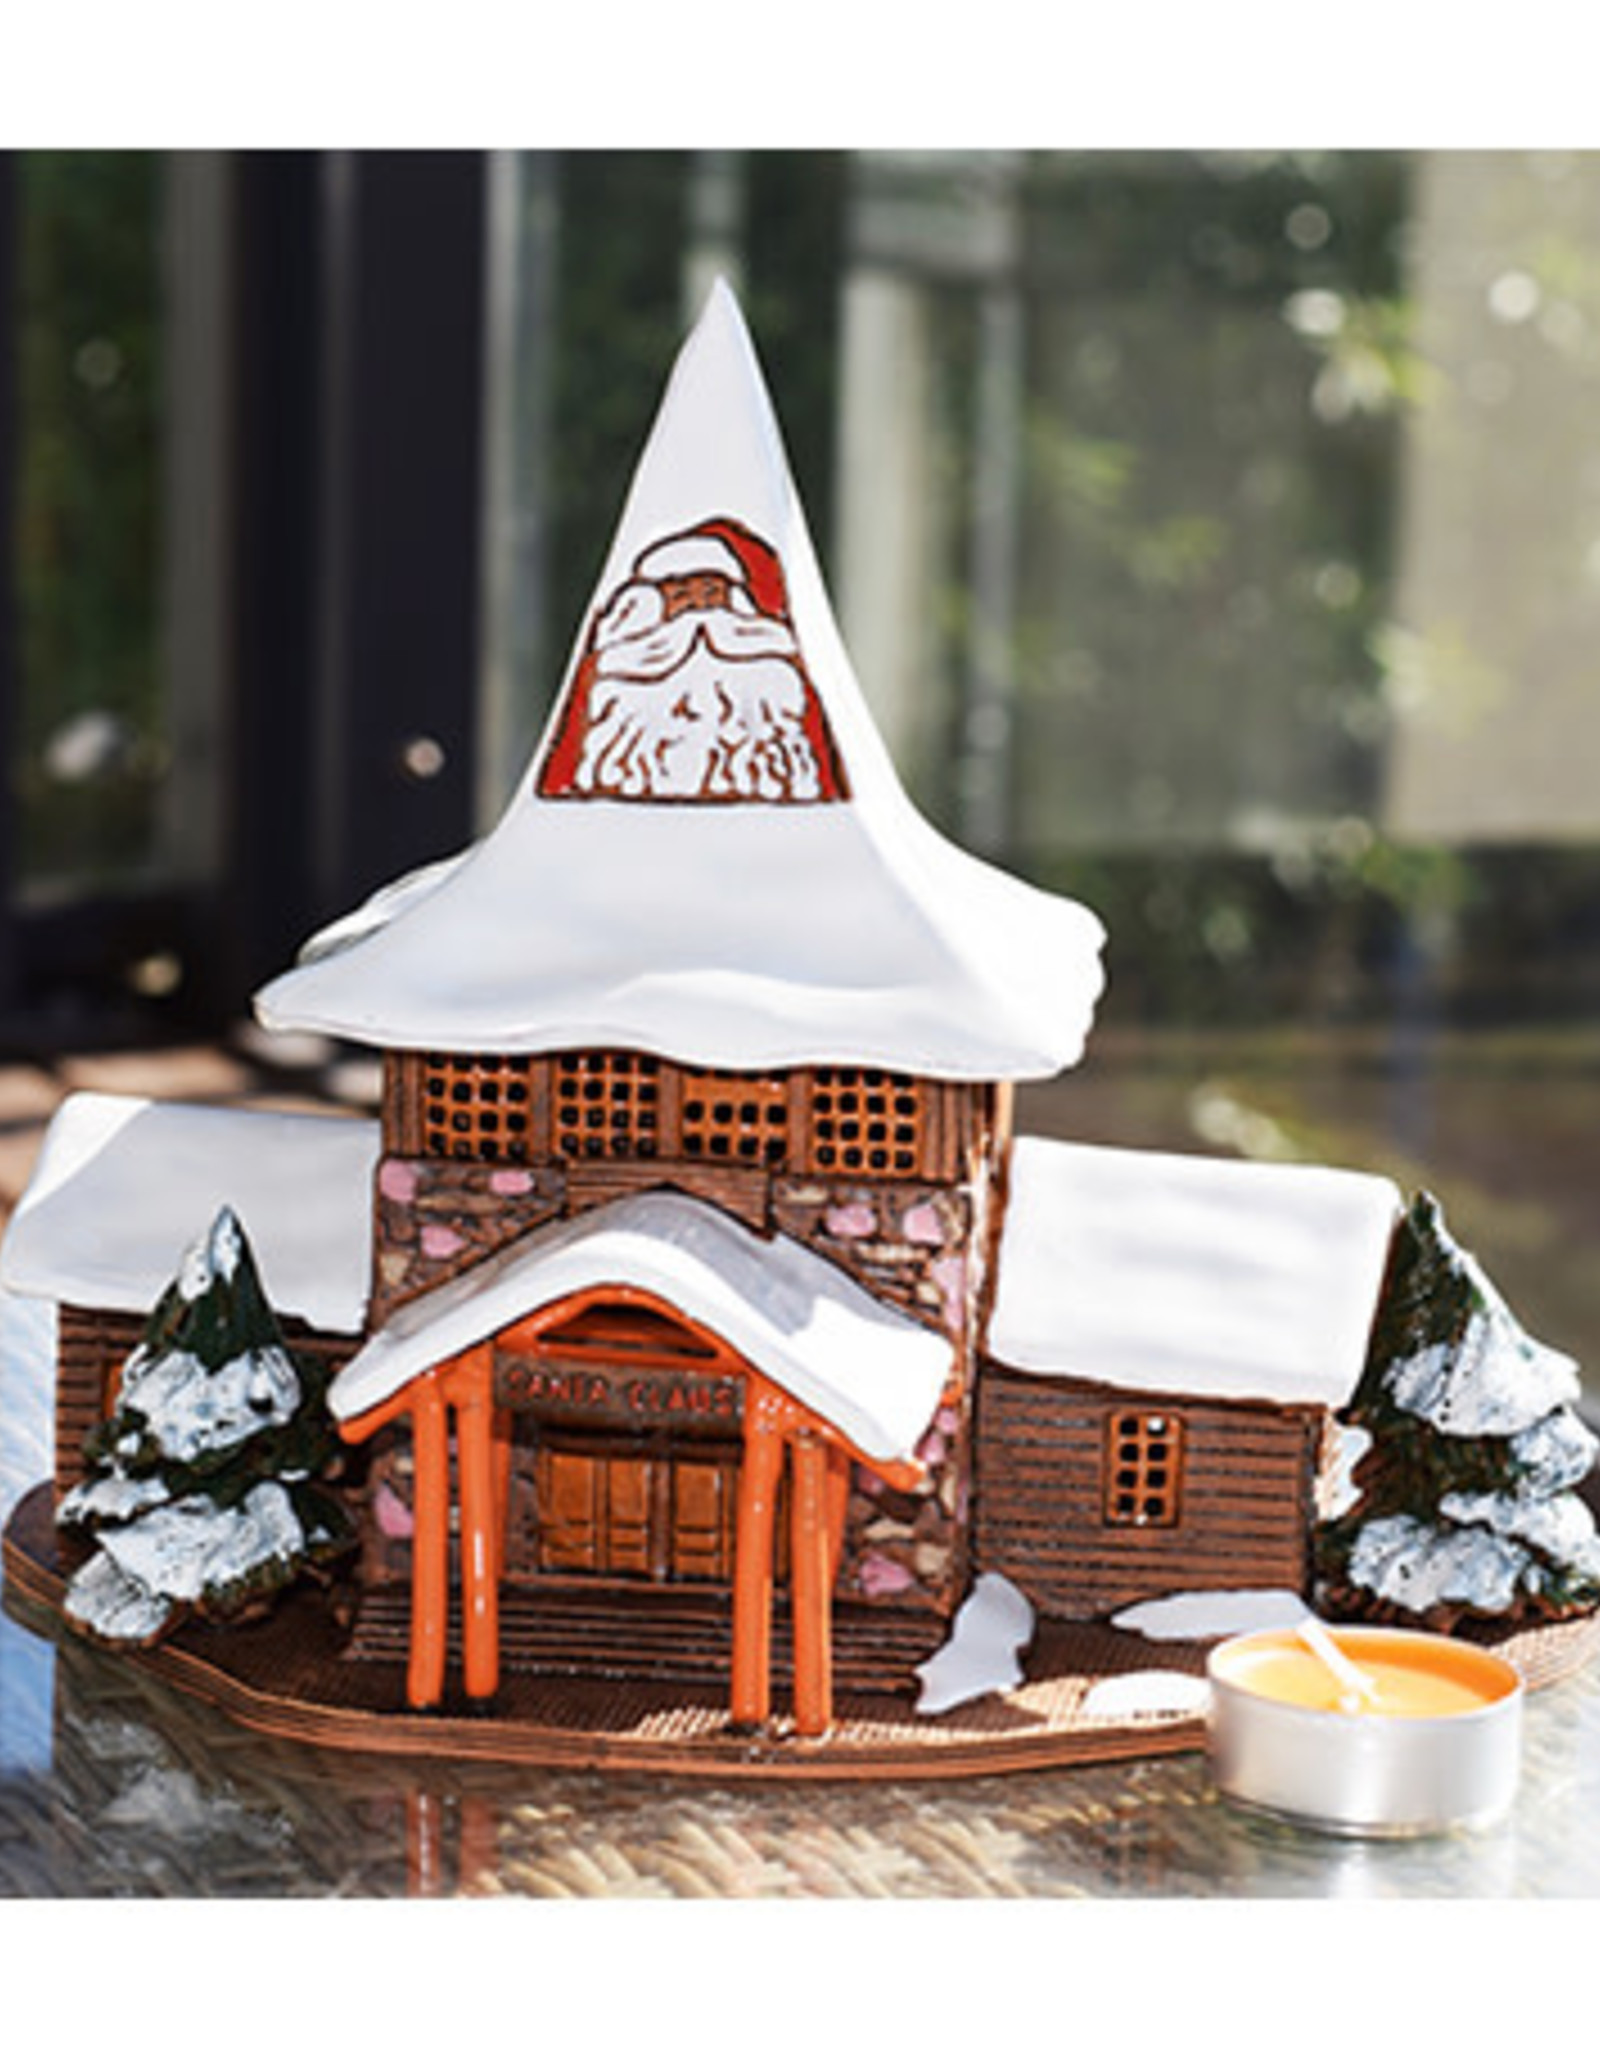 Nordic Dreams Real Santa Claus Christmas Village in Rovaniemi in Finland. Ceramic house tealight. 6,7 x 4,5 x 4,7 inches